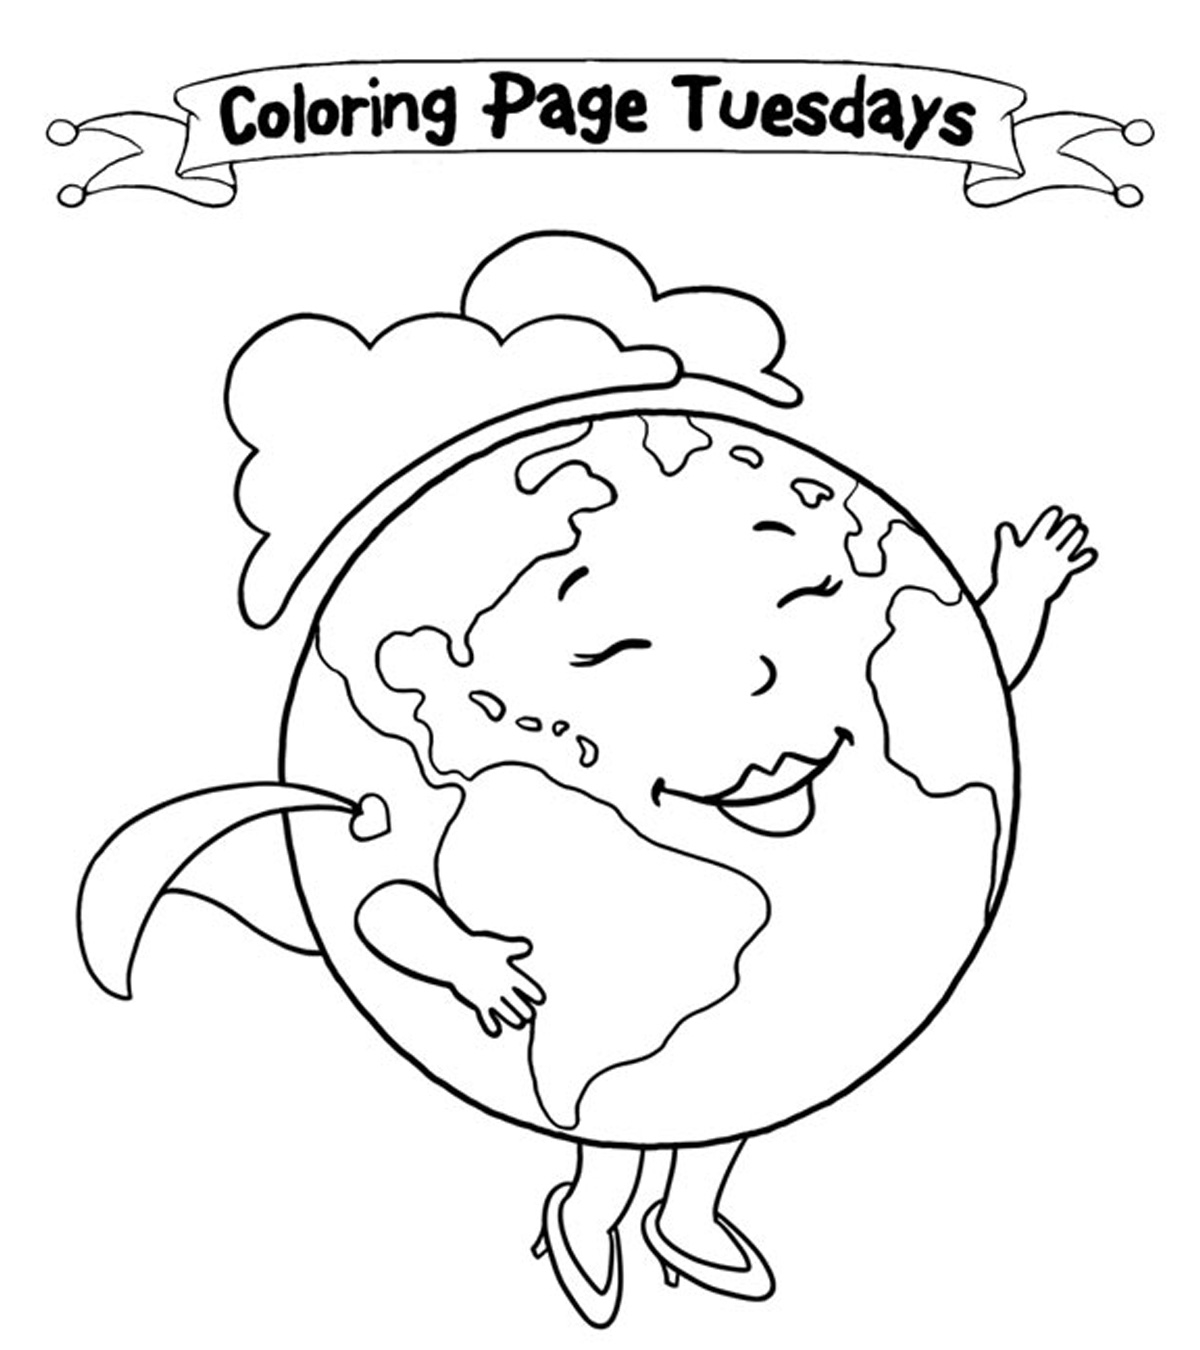 Free Printable Earth Day Coloring Pages And Activities Top 20 Free Printable Earth Day Coloring Pages Online